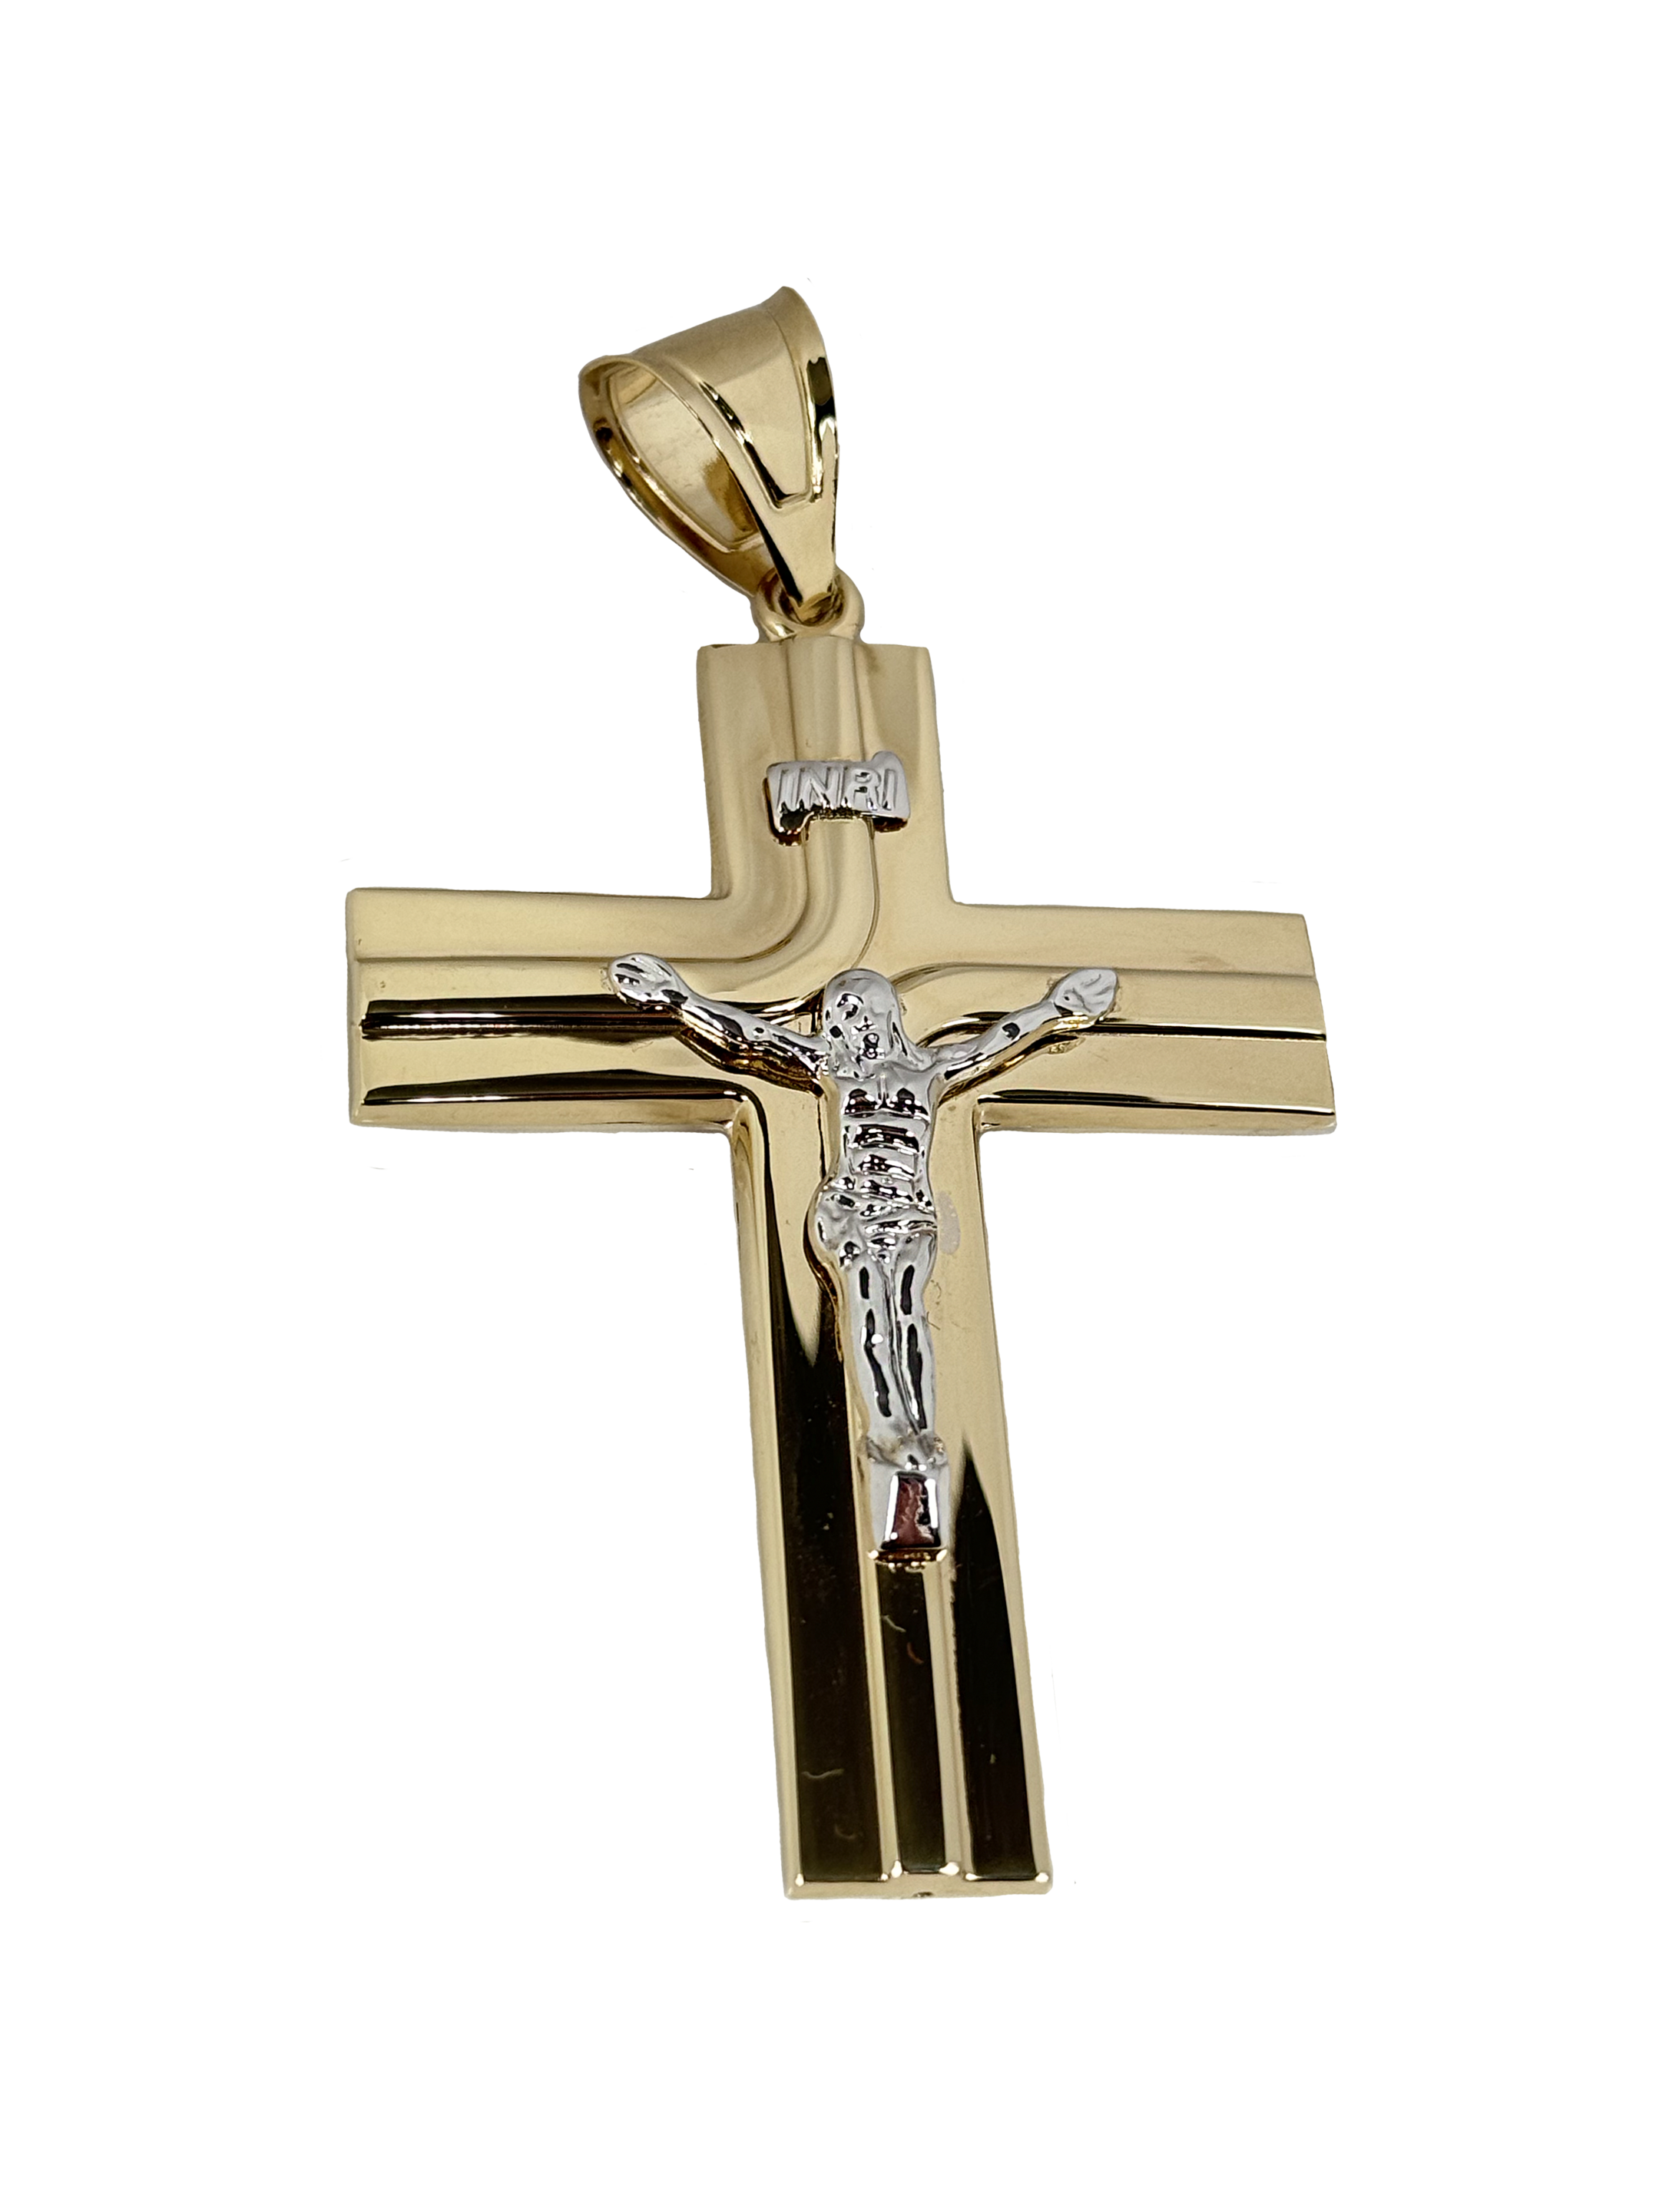 Gold two-tone cross pendant with Jesus